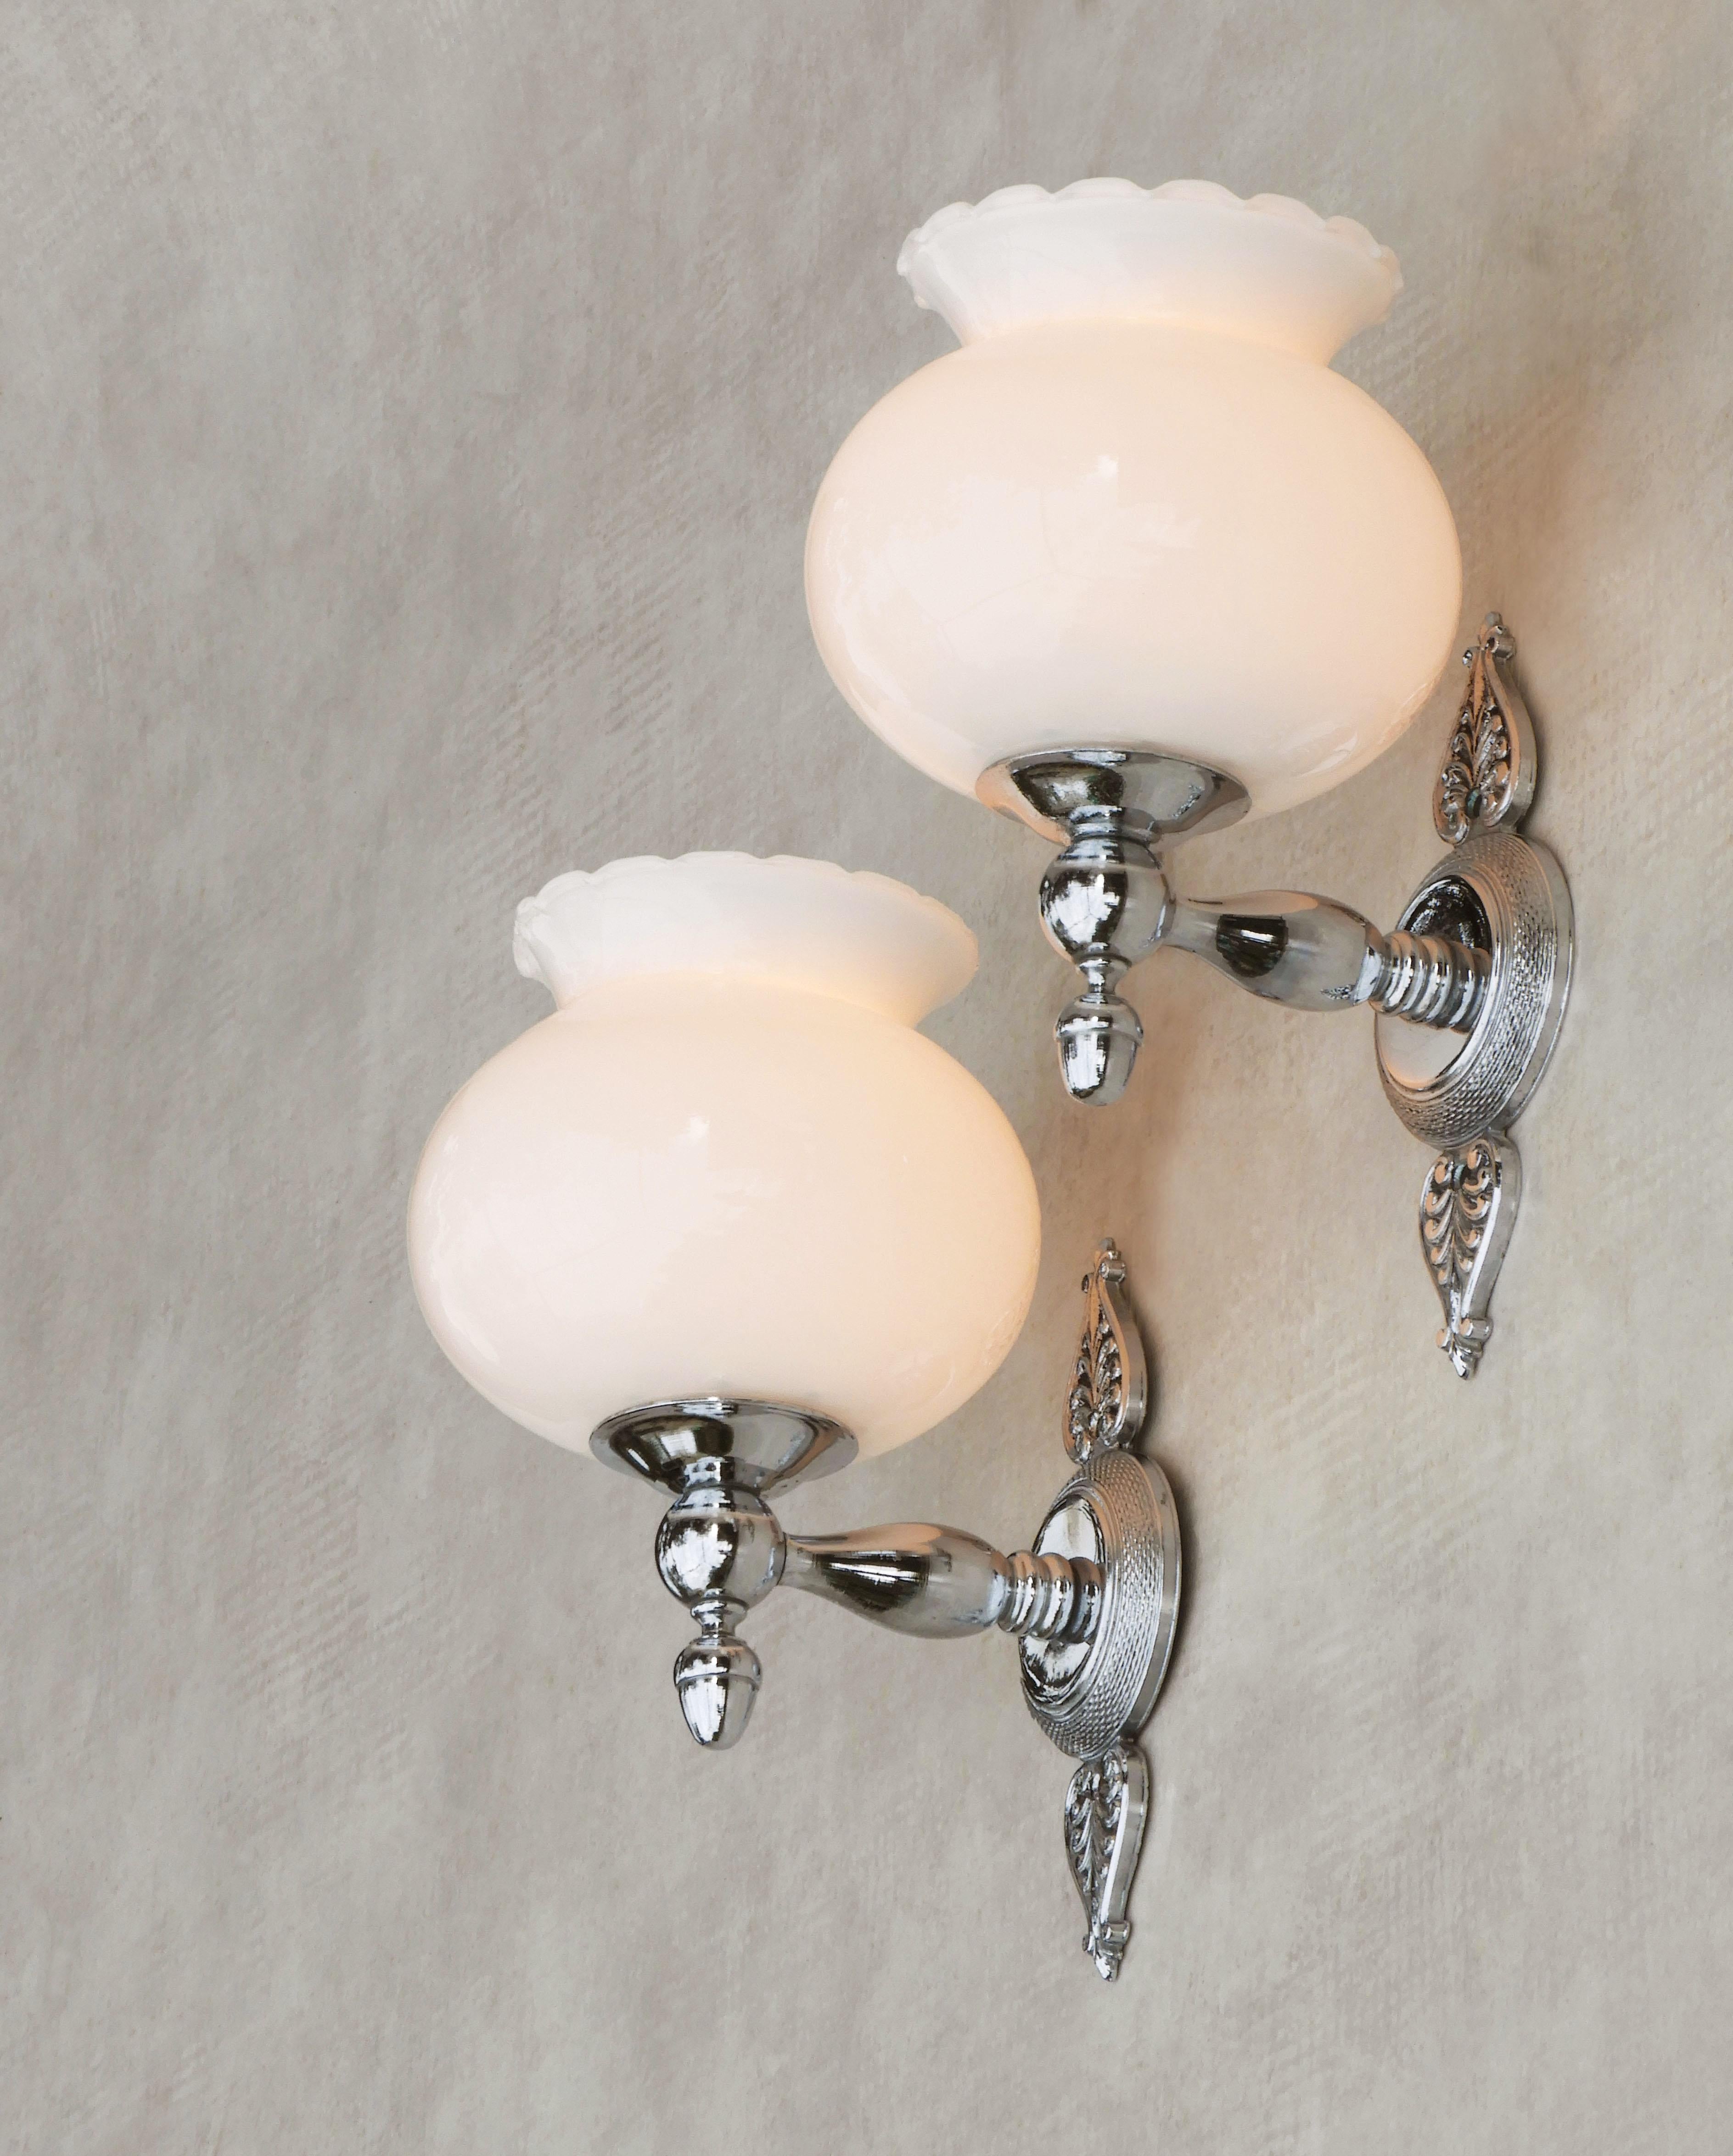 Beautiful pair of Empire-style sconces, France circa 1970. Stylish, French wall lights in chrome and glossy white opaline glass, a sophisticated modern take on a timeless classic design. Well-made, good-quality lights, perfect for either side of a